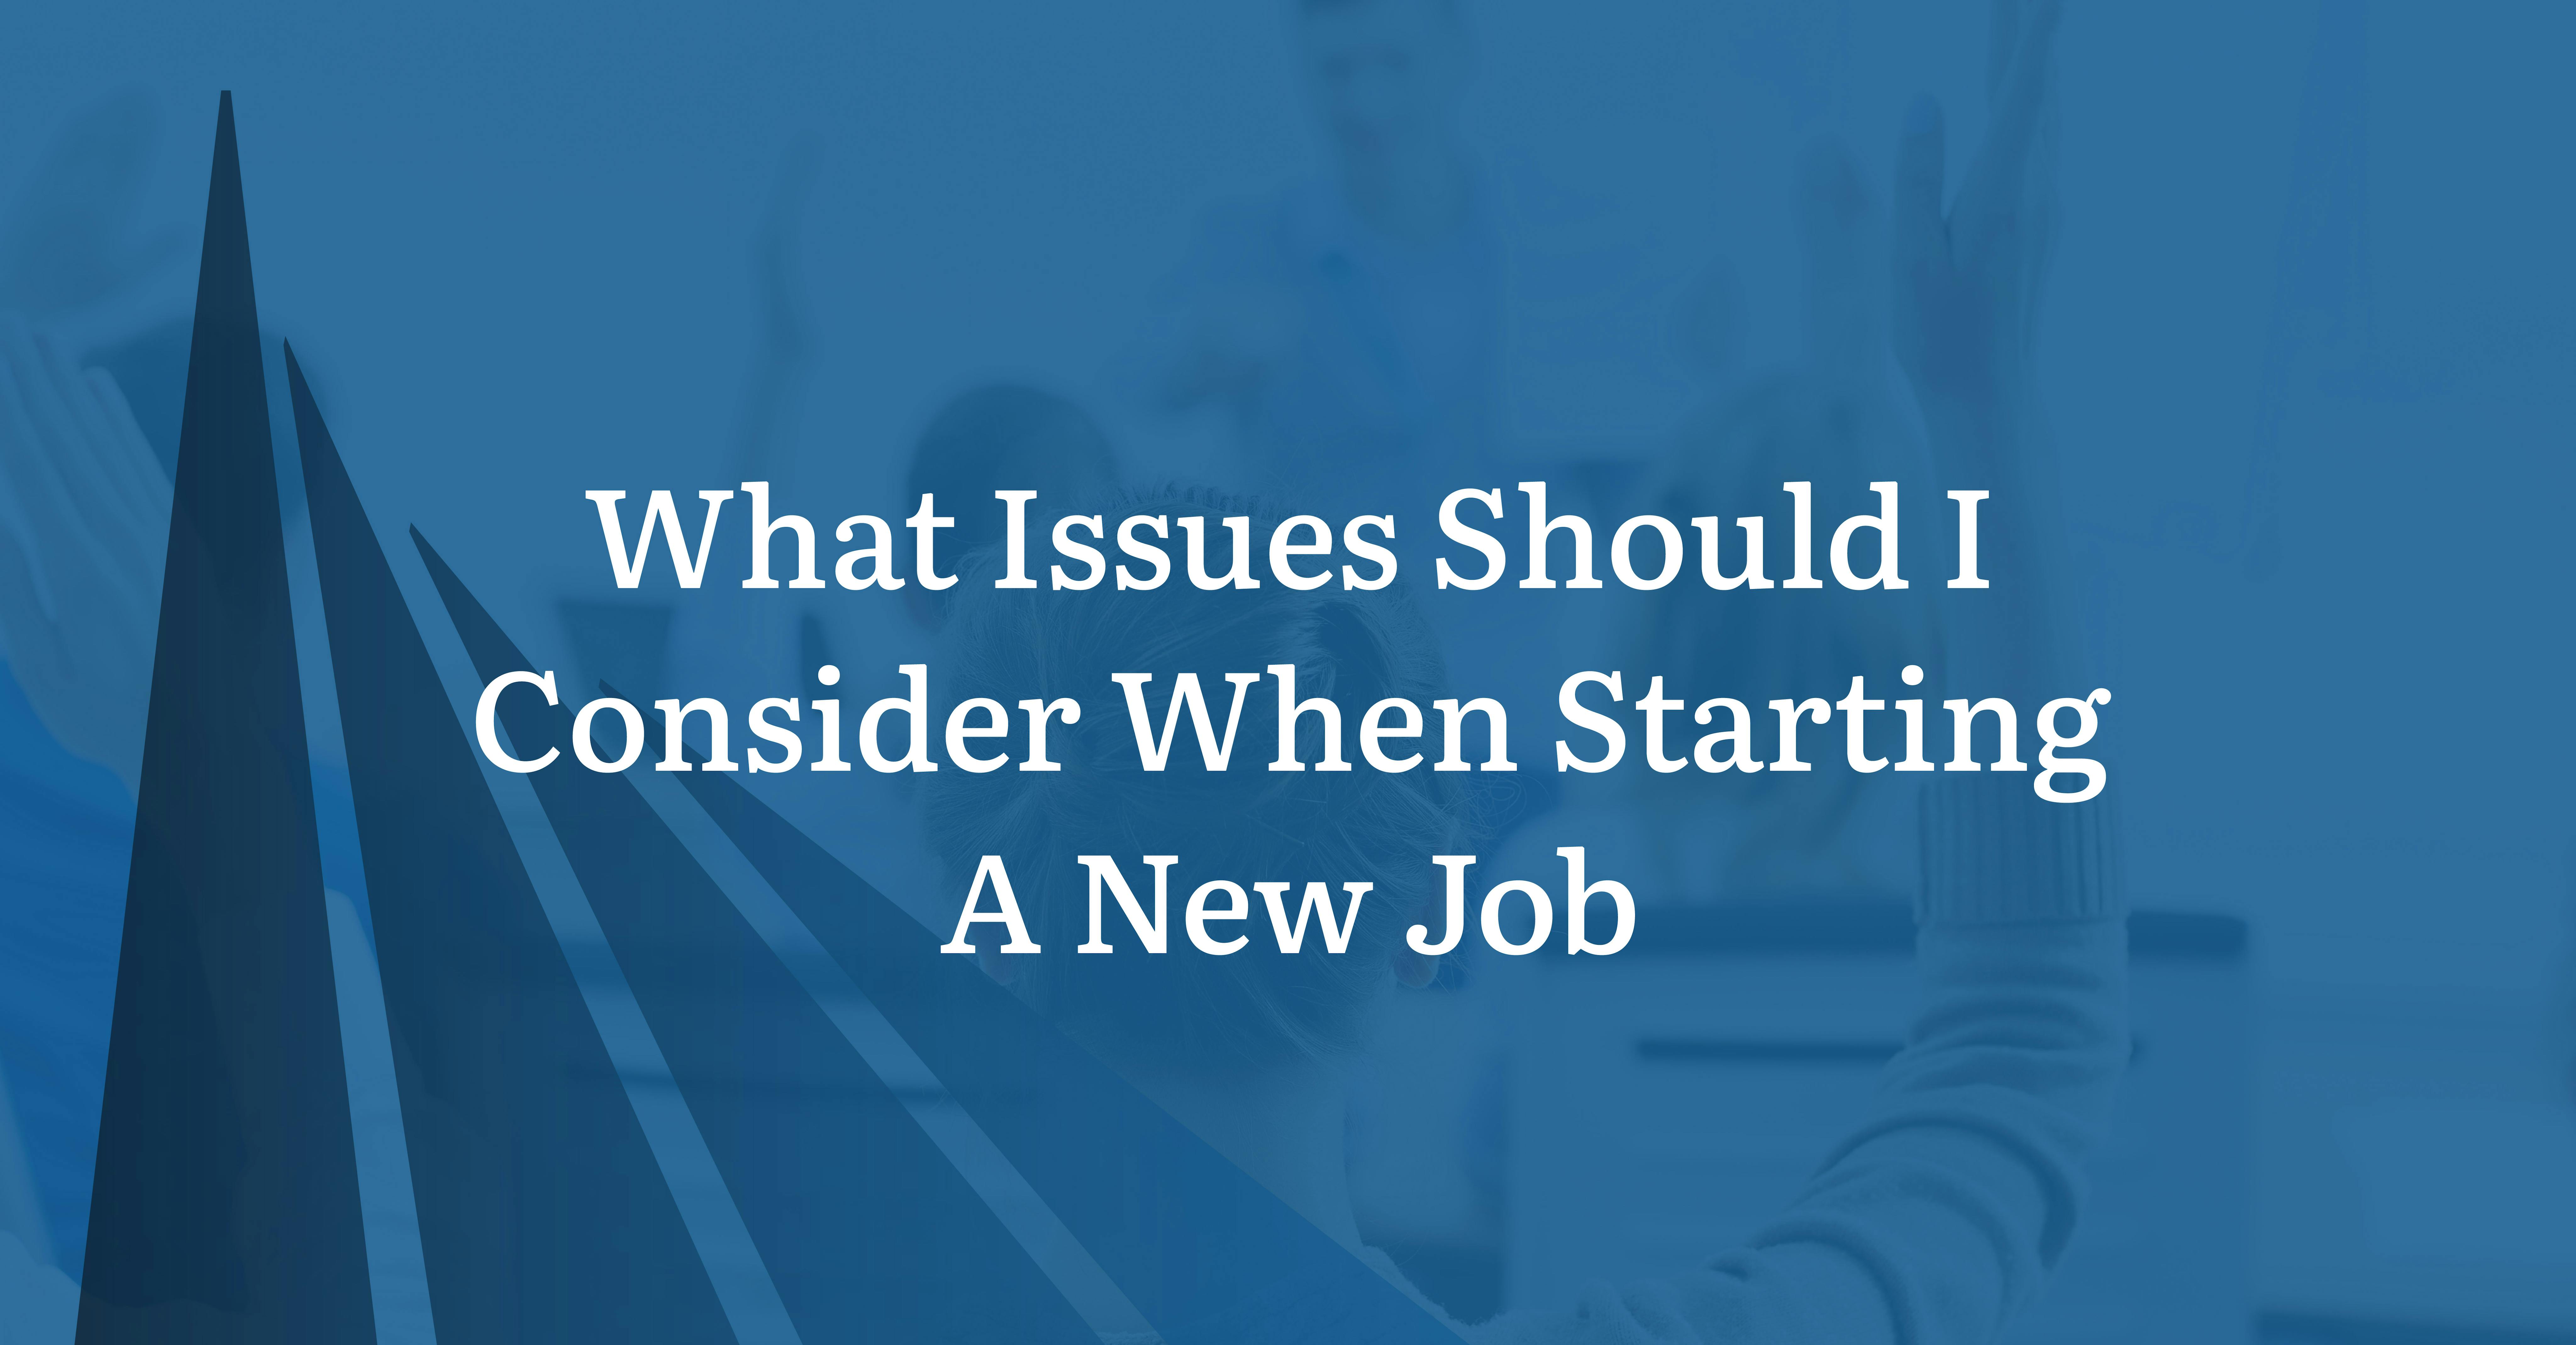 What Issues Should I Consider When Starting A New Job